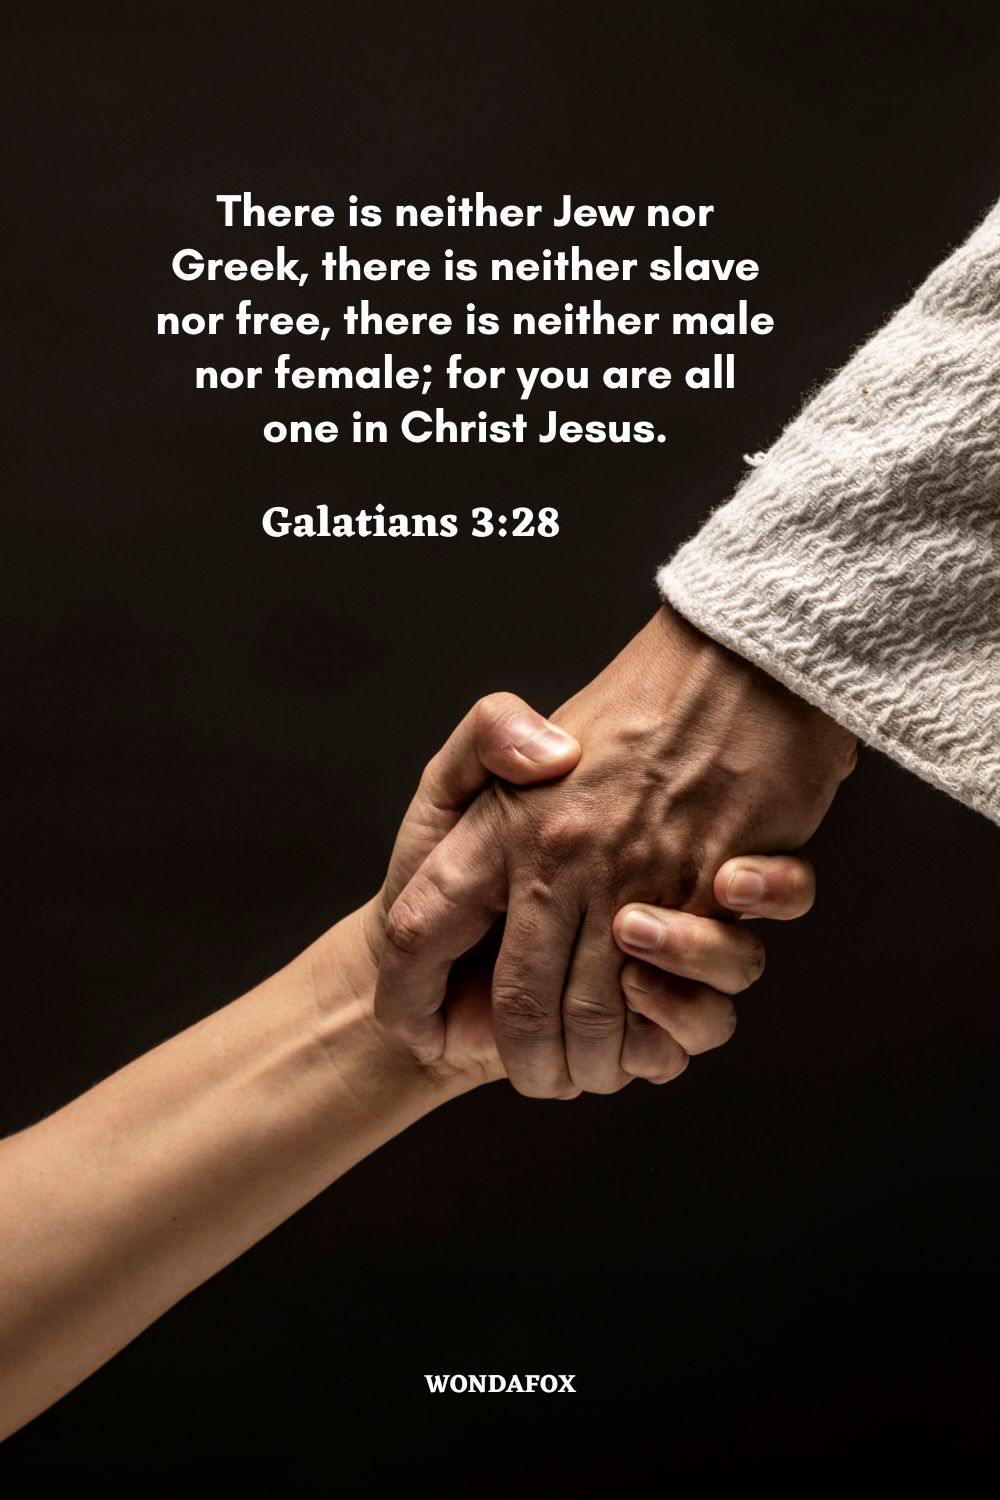 There is neither Jew nor Greek, there is neither slave nor free, there is neither male nor female; for you are all one in Christ Jesus.
Galatians 3:28